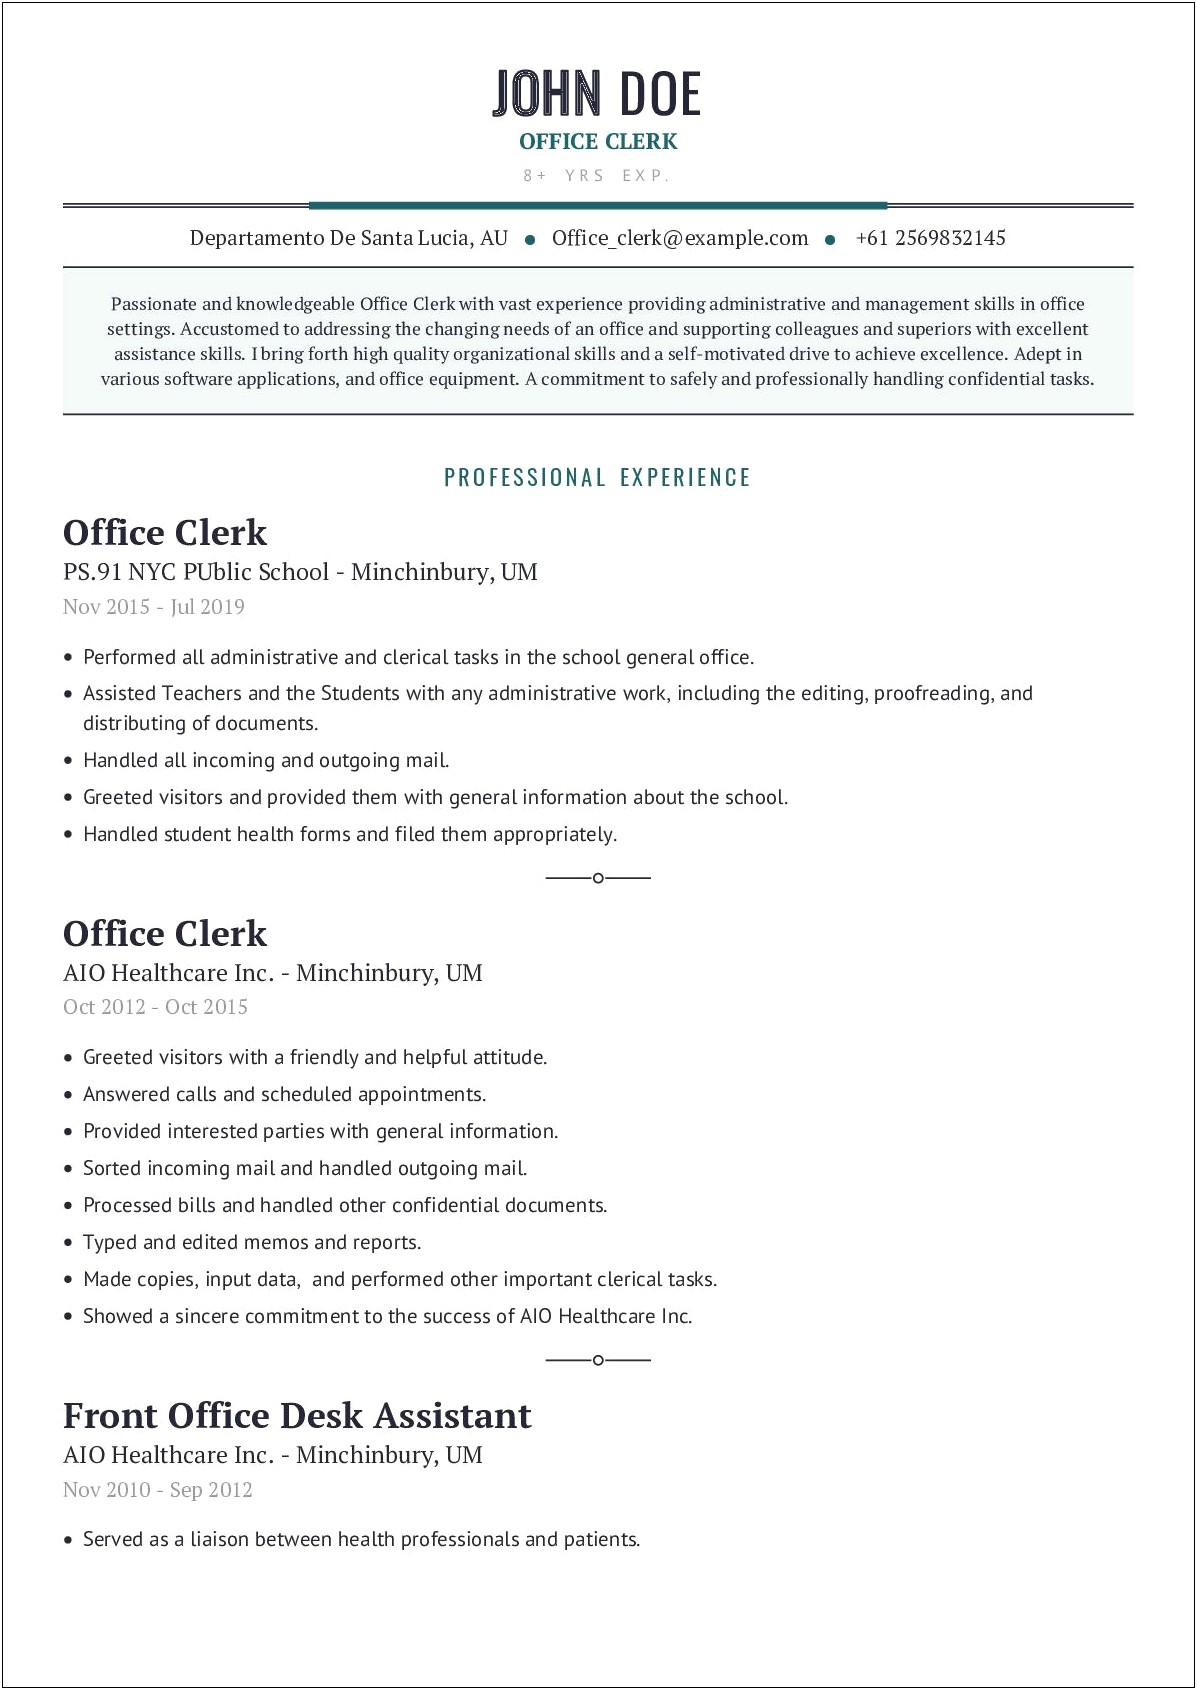 Resume Examples For Clerical Work